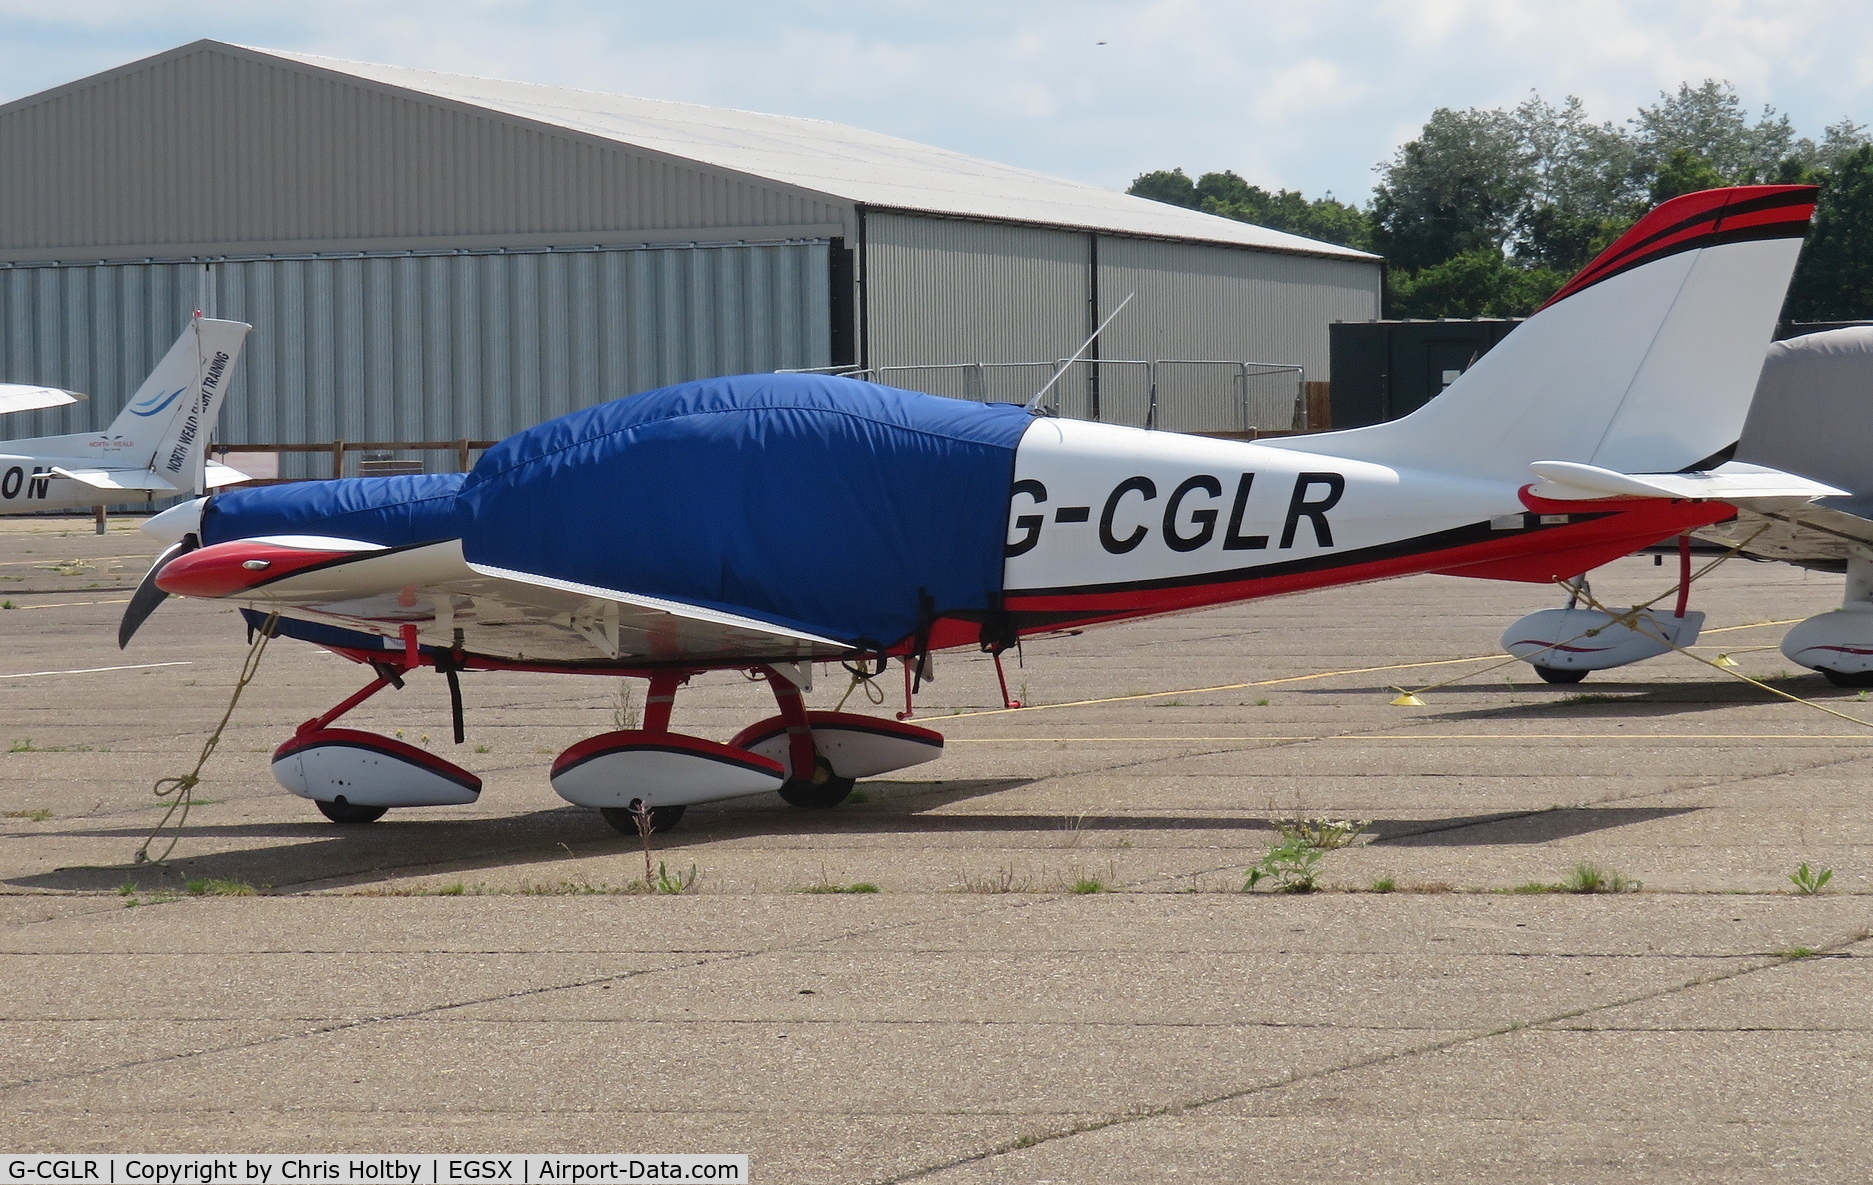 G-CGLR, 2010 CZAW SportCruiser C/N 09SC324, Parked and covered at North Weald, Essex